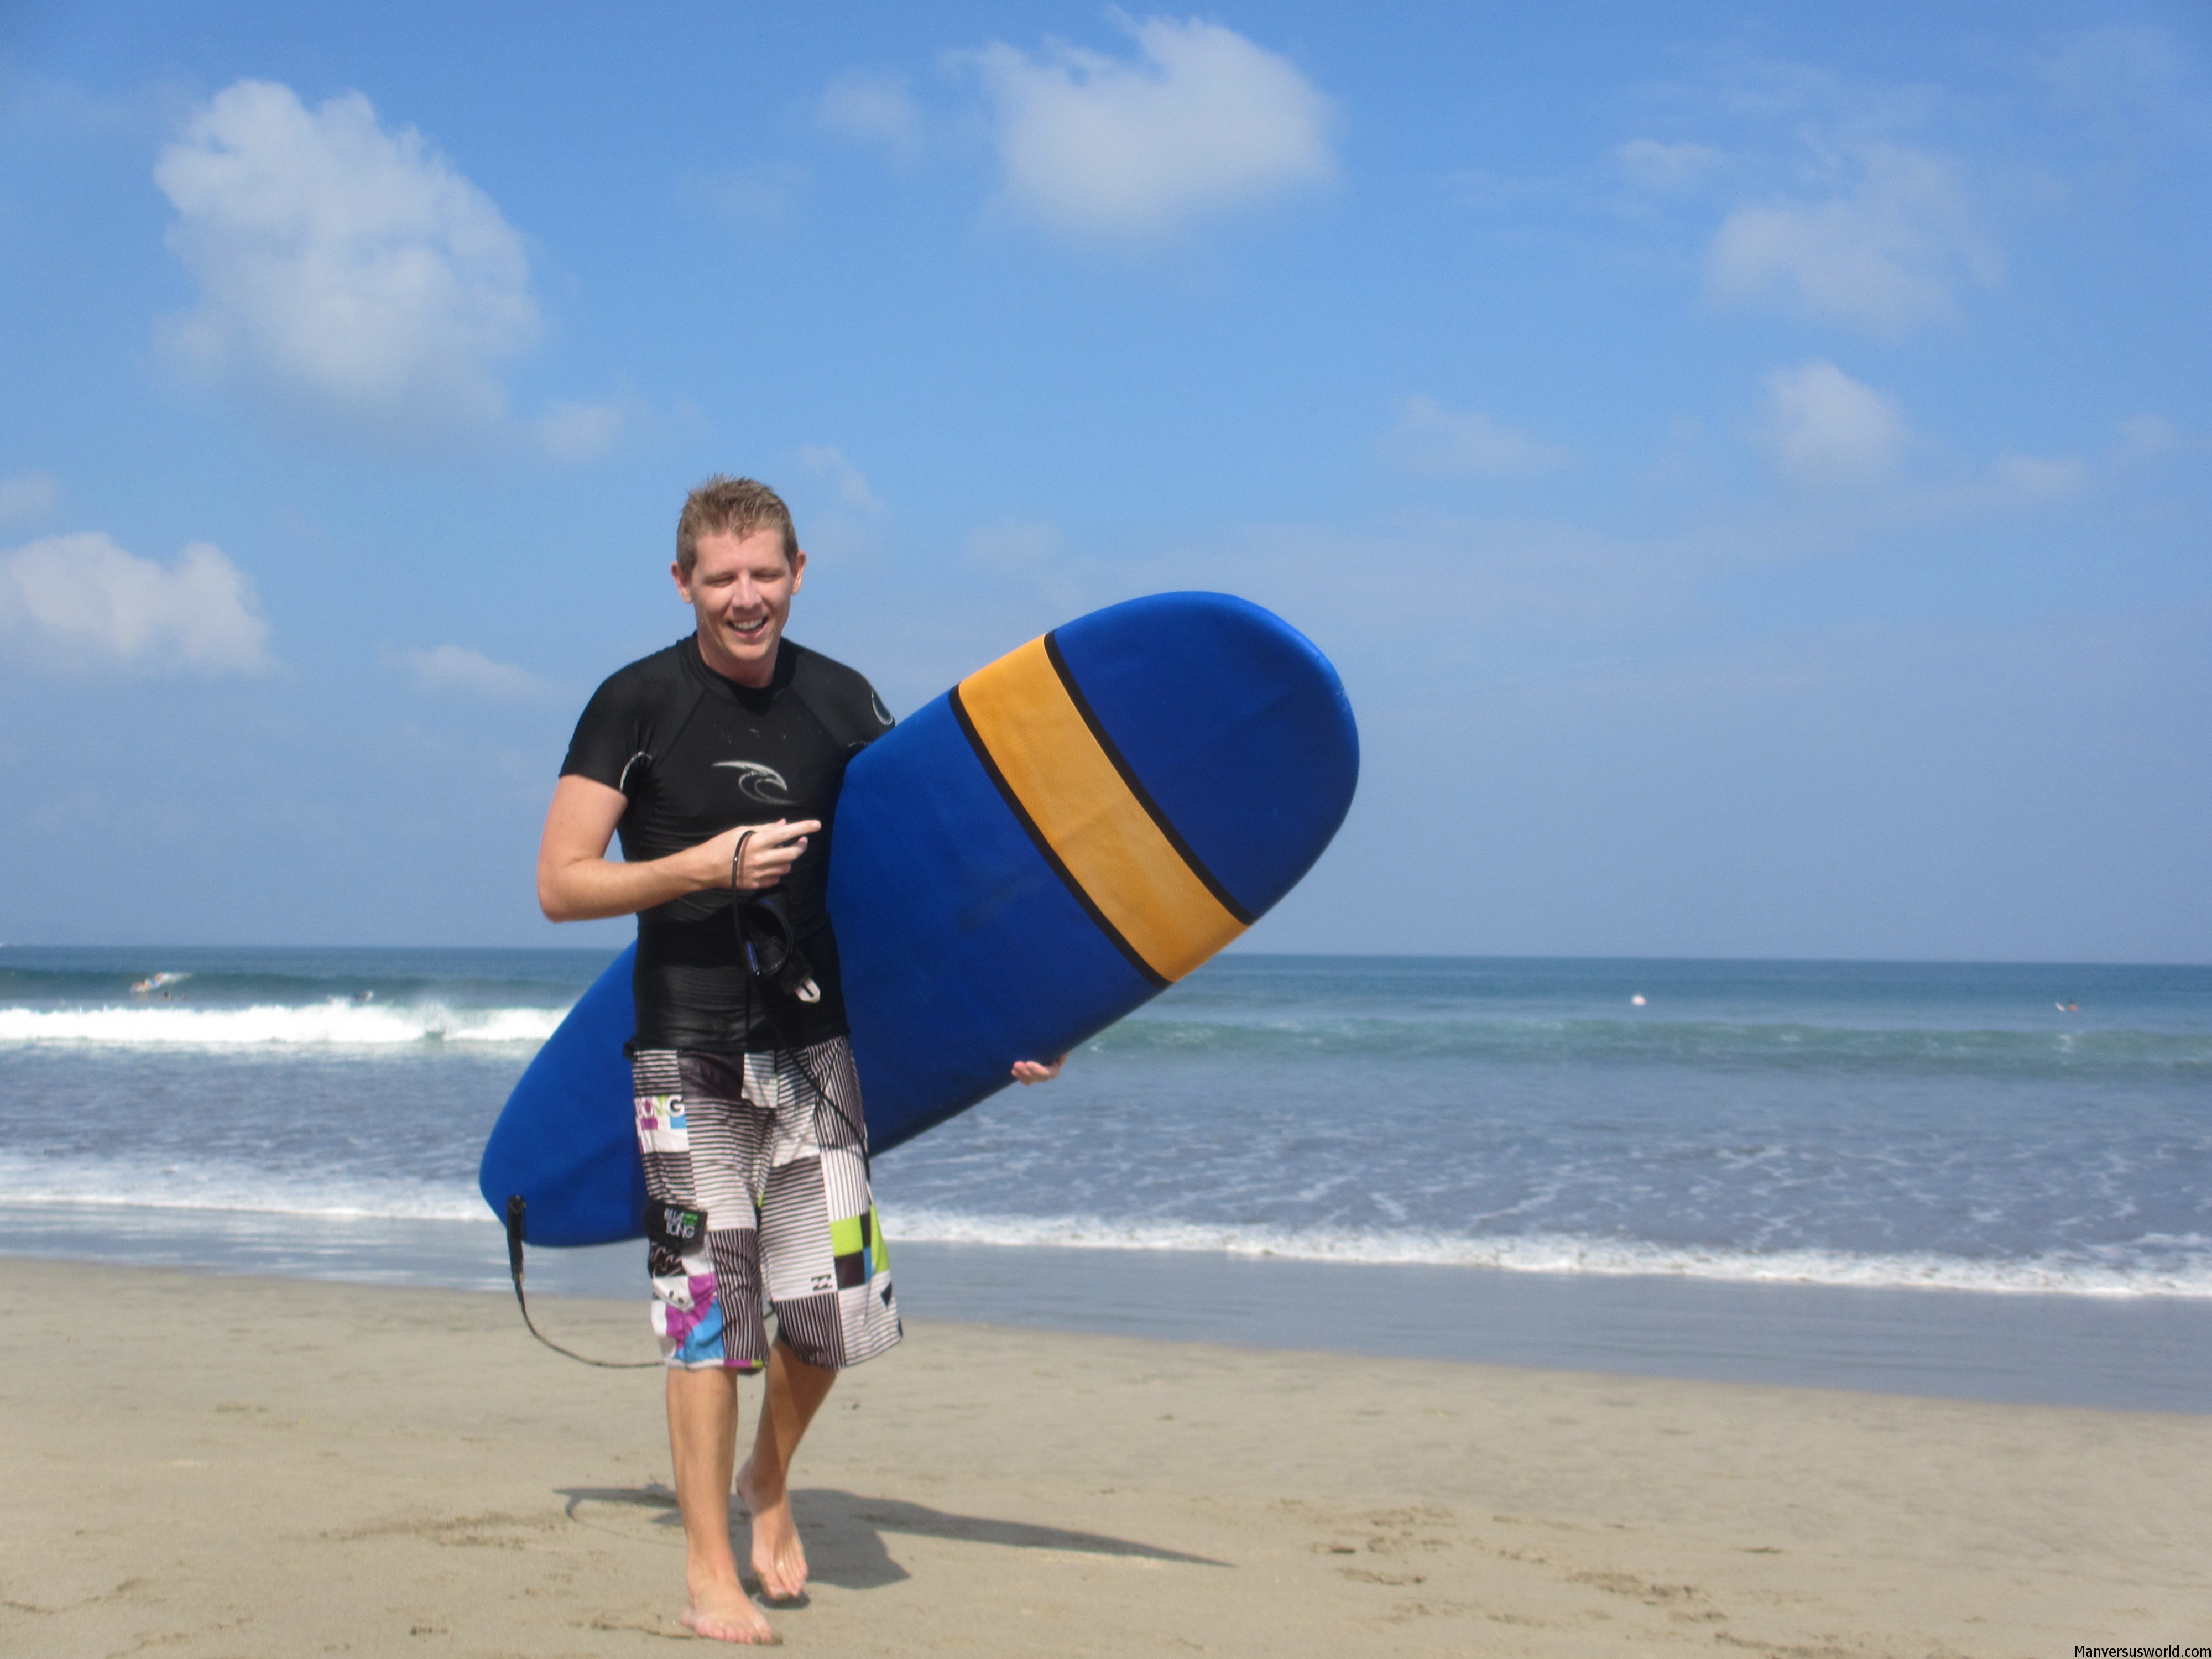 Pleased as punch: learning to surf on Kuta Beach, Bali